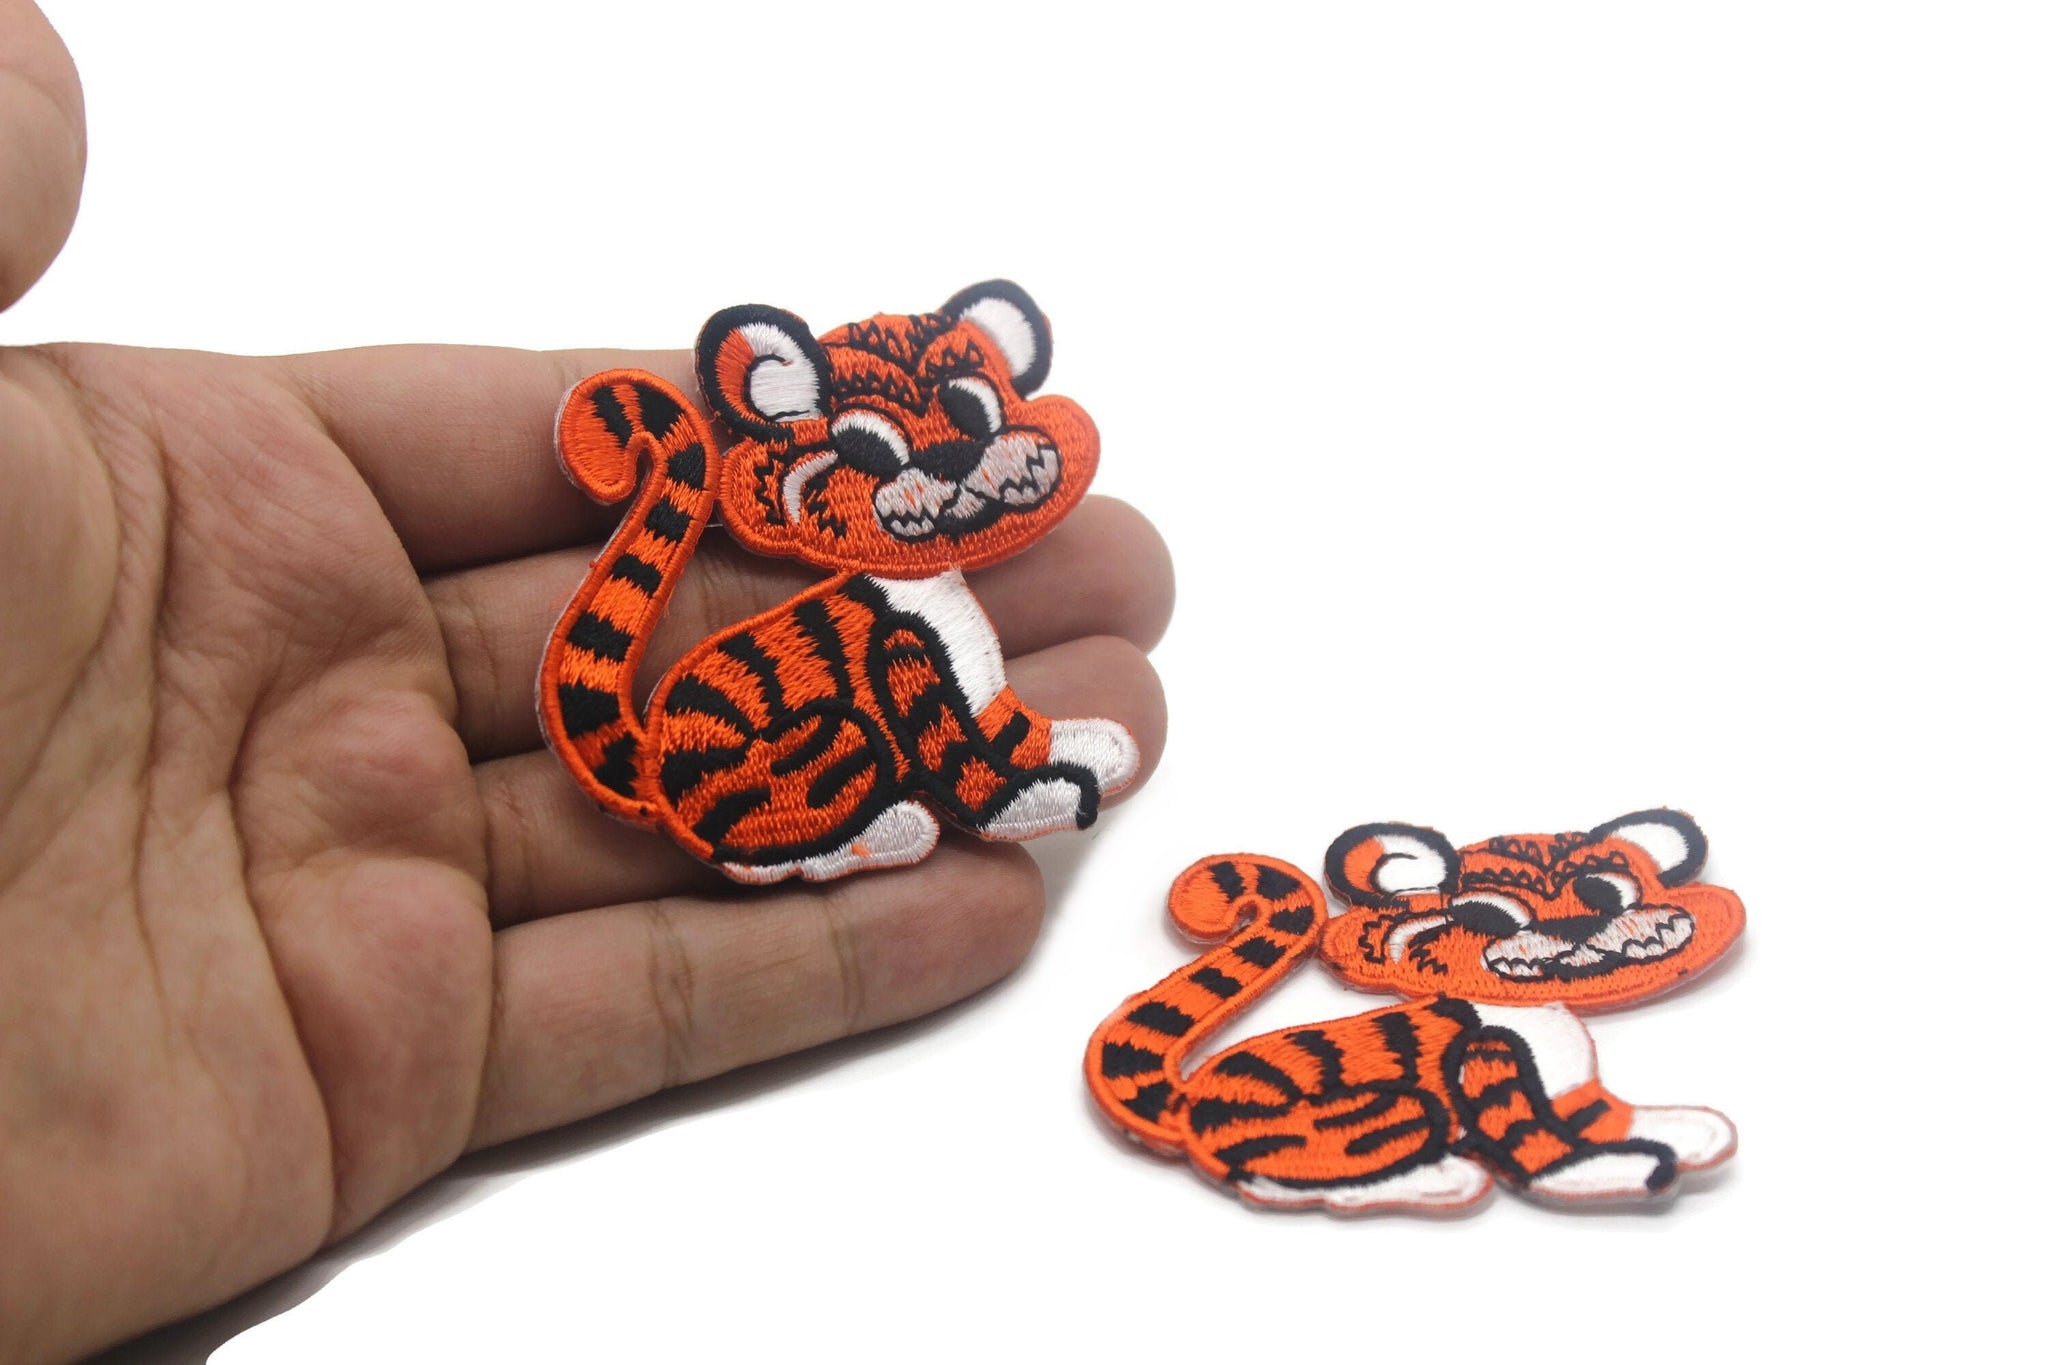 12Pcs Lovely Tiger Patch 2.16 Inch Iron On Patch Embroidery, Custom Patch, High Quality Sew On Badge for Denim, Sew On Patch,Animal Applique